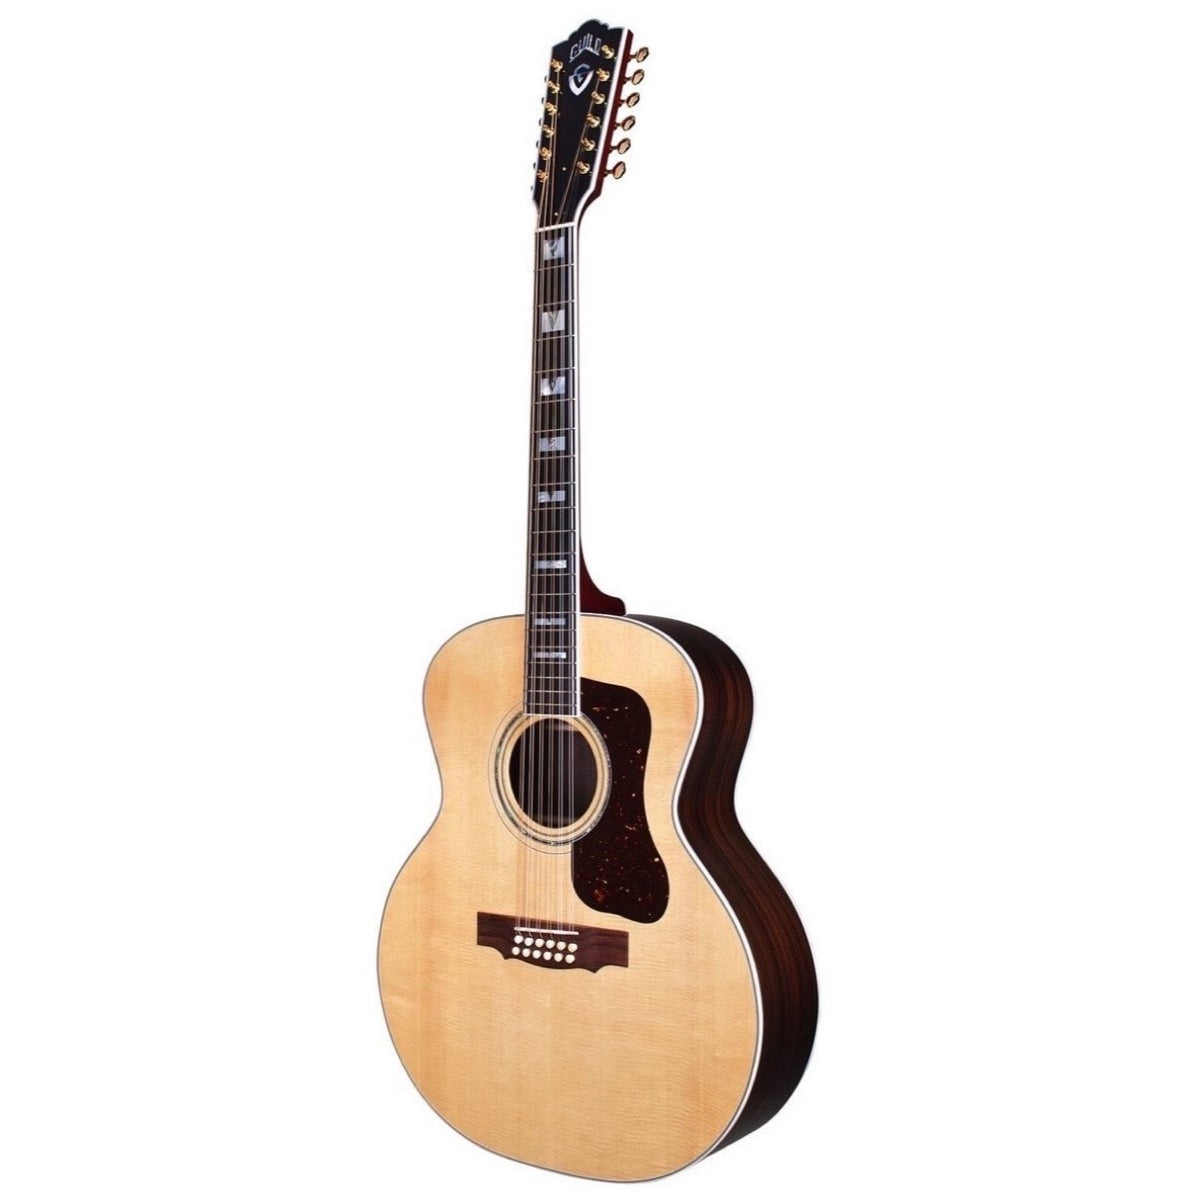 Guild F-512 12-String Acoustic Guitar (with Case), Natural